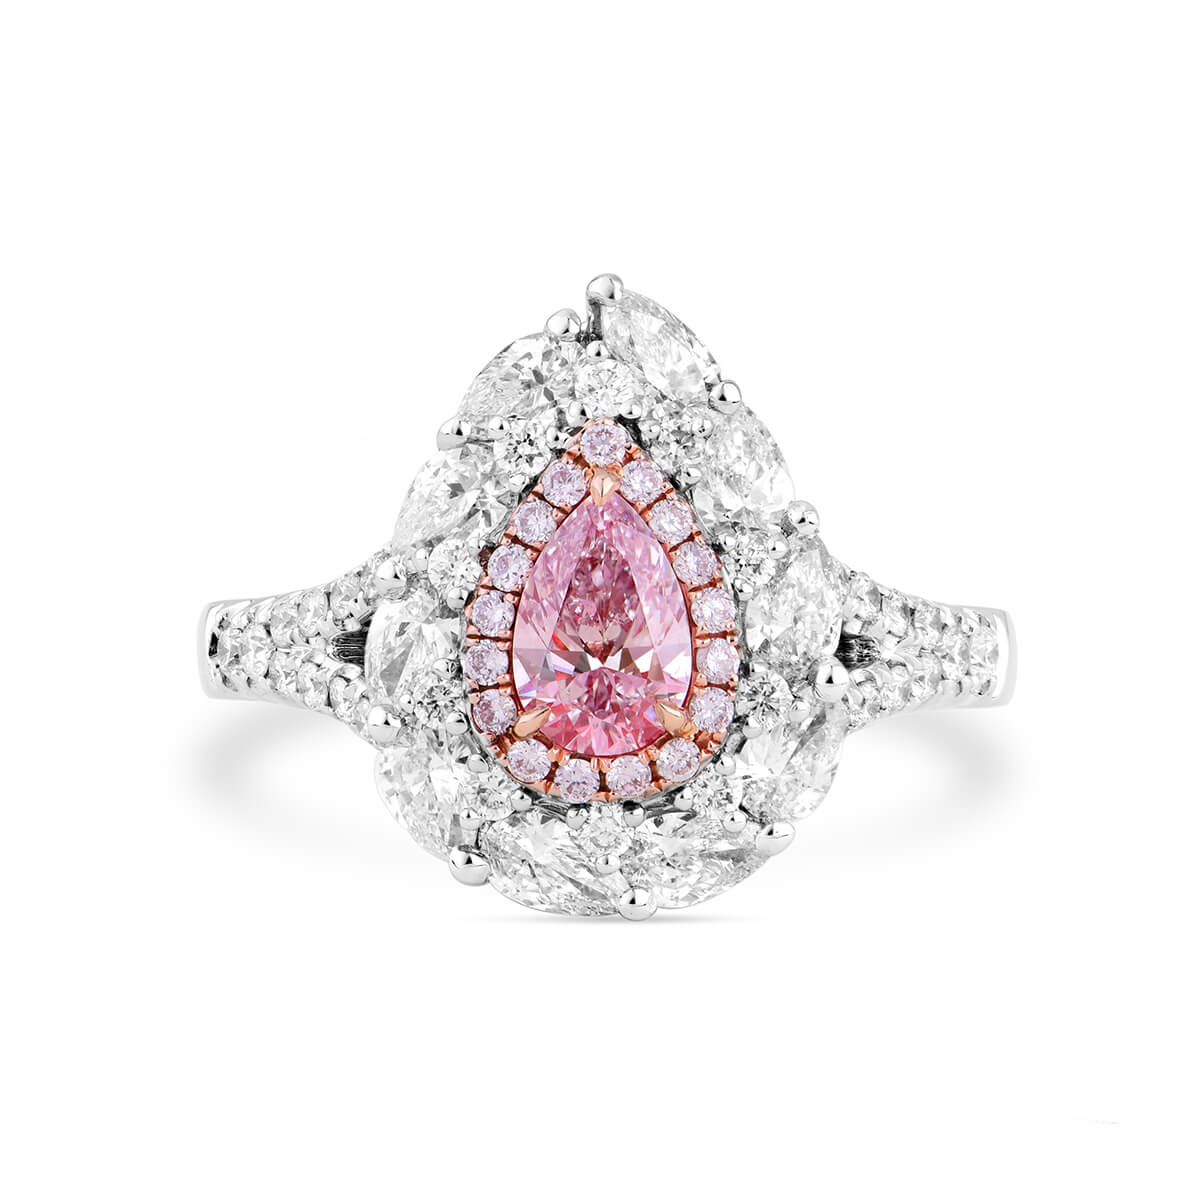 Faint Pink Diamond Ring, 1.68 Ct. TW, Pear shape, GIA Certified, 2244097367